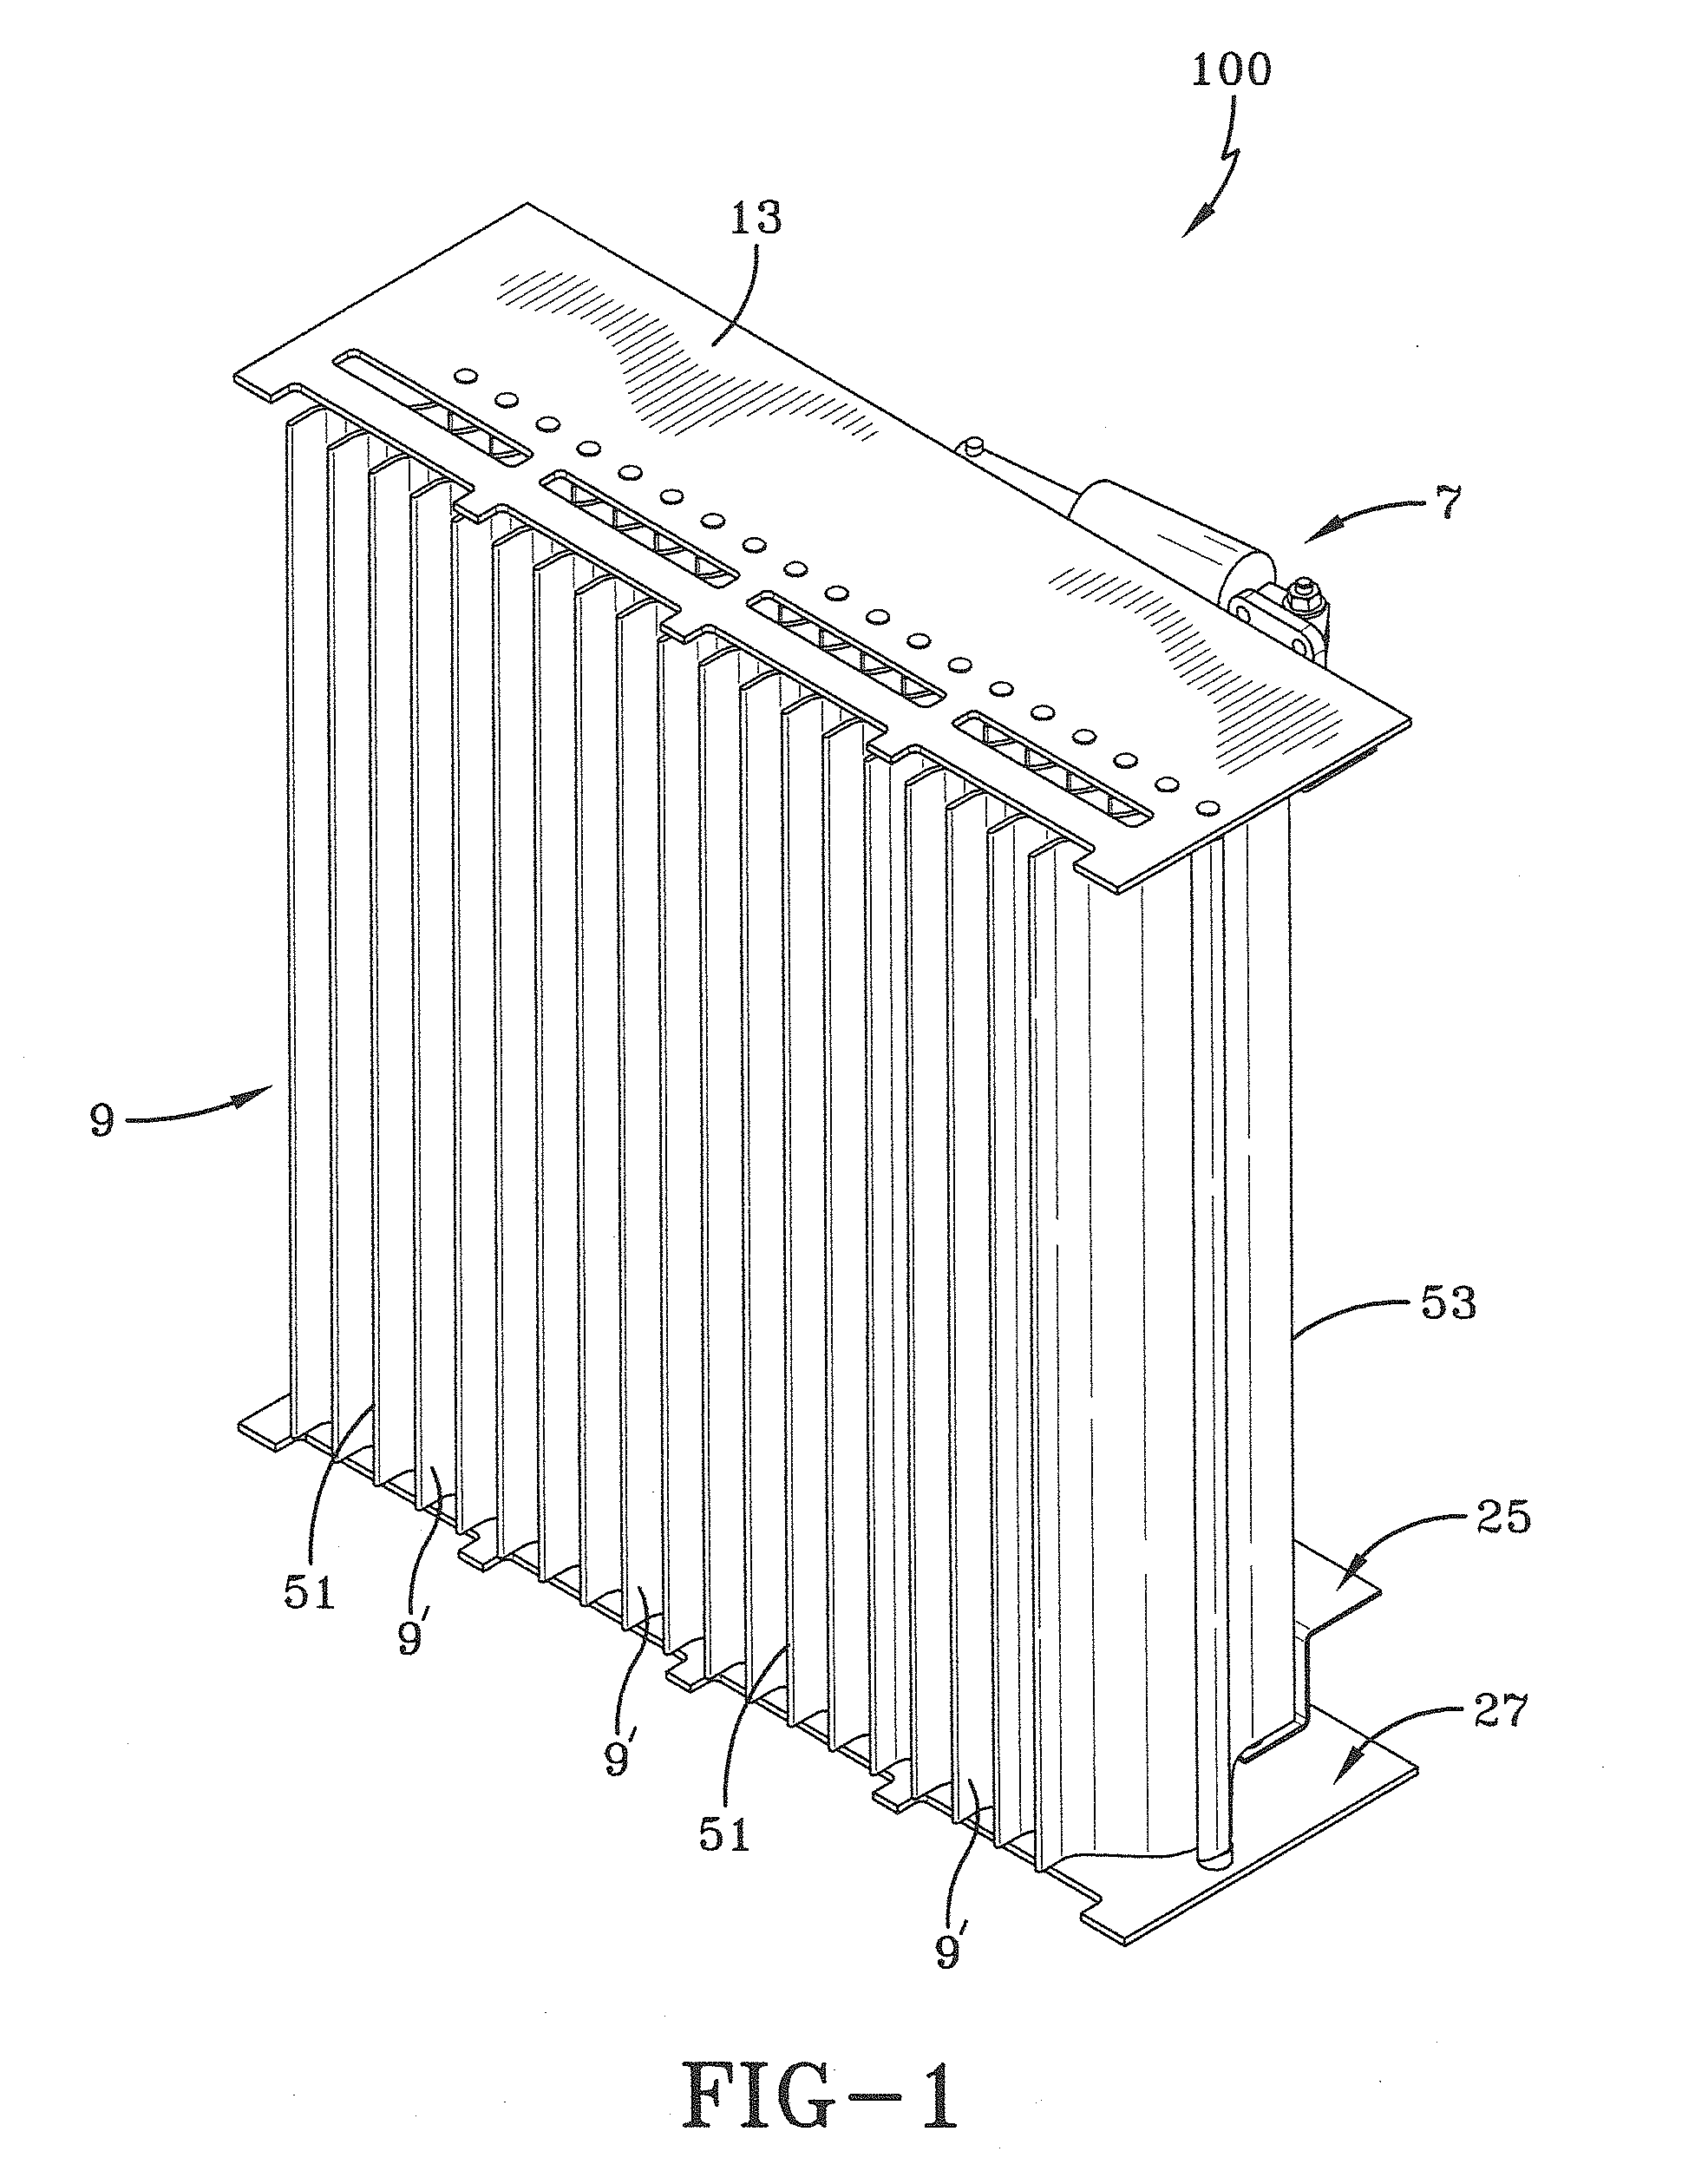 Louver device for removing moisture and dust